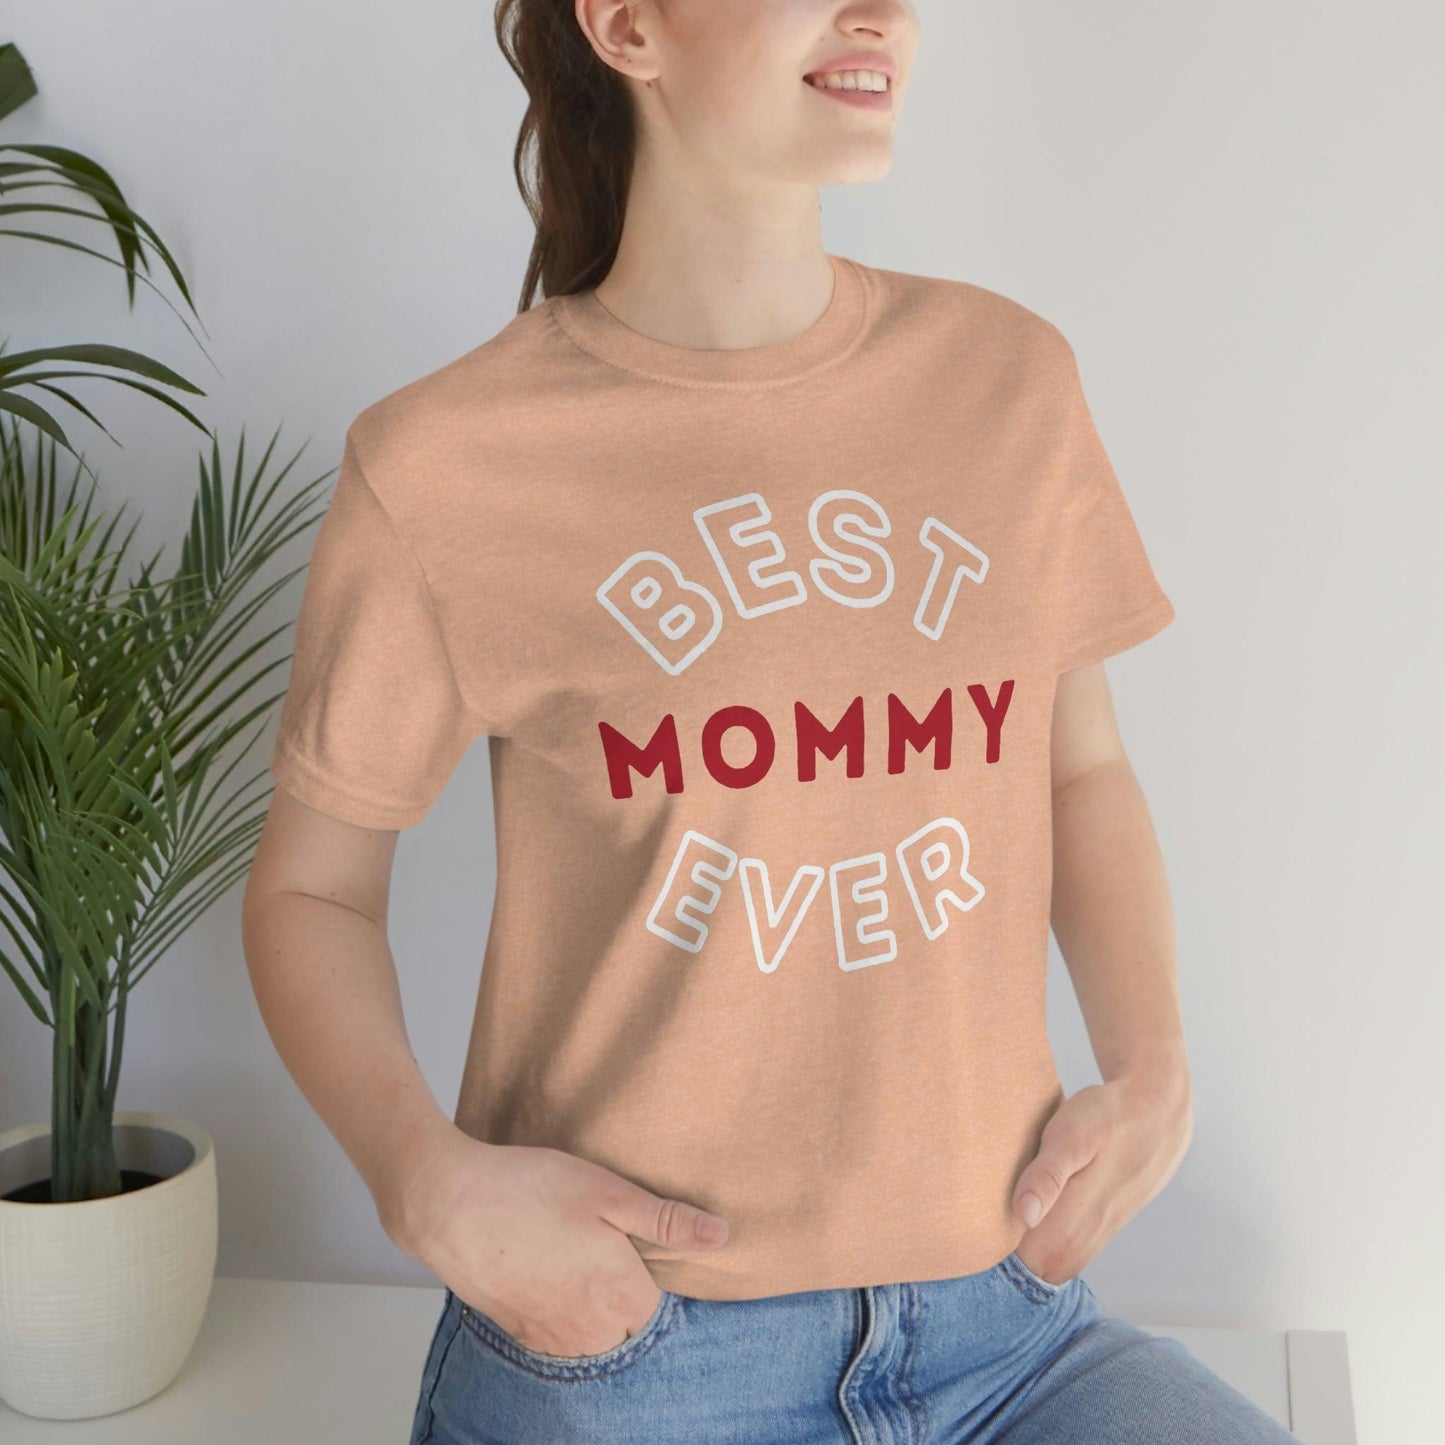 Best Mommy Ever Shirt, Mothers day shirt, gift for mom, Mom birthday gift, Mothers day t shirts, Mothers shirts, Best mothers day gifta